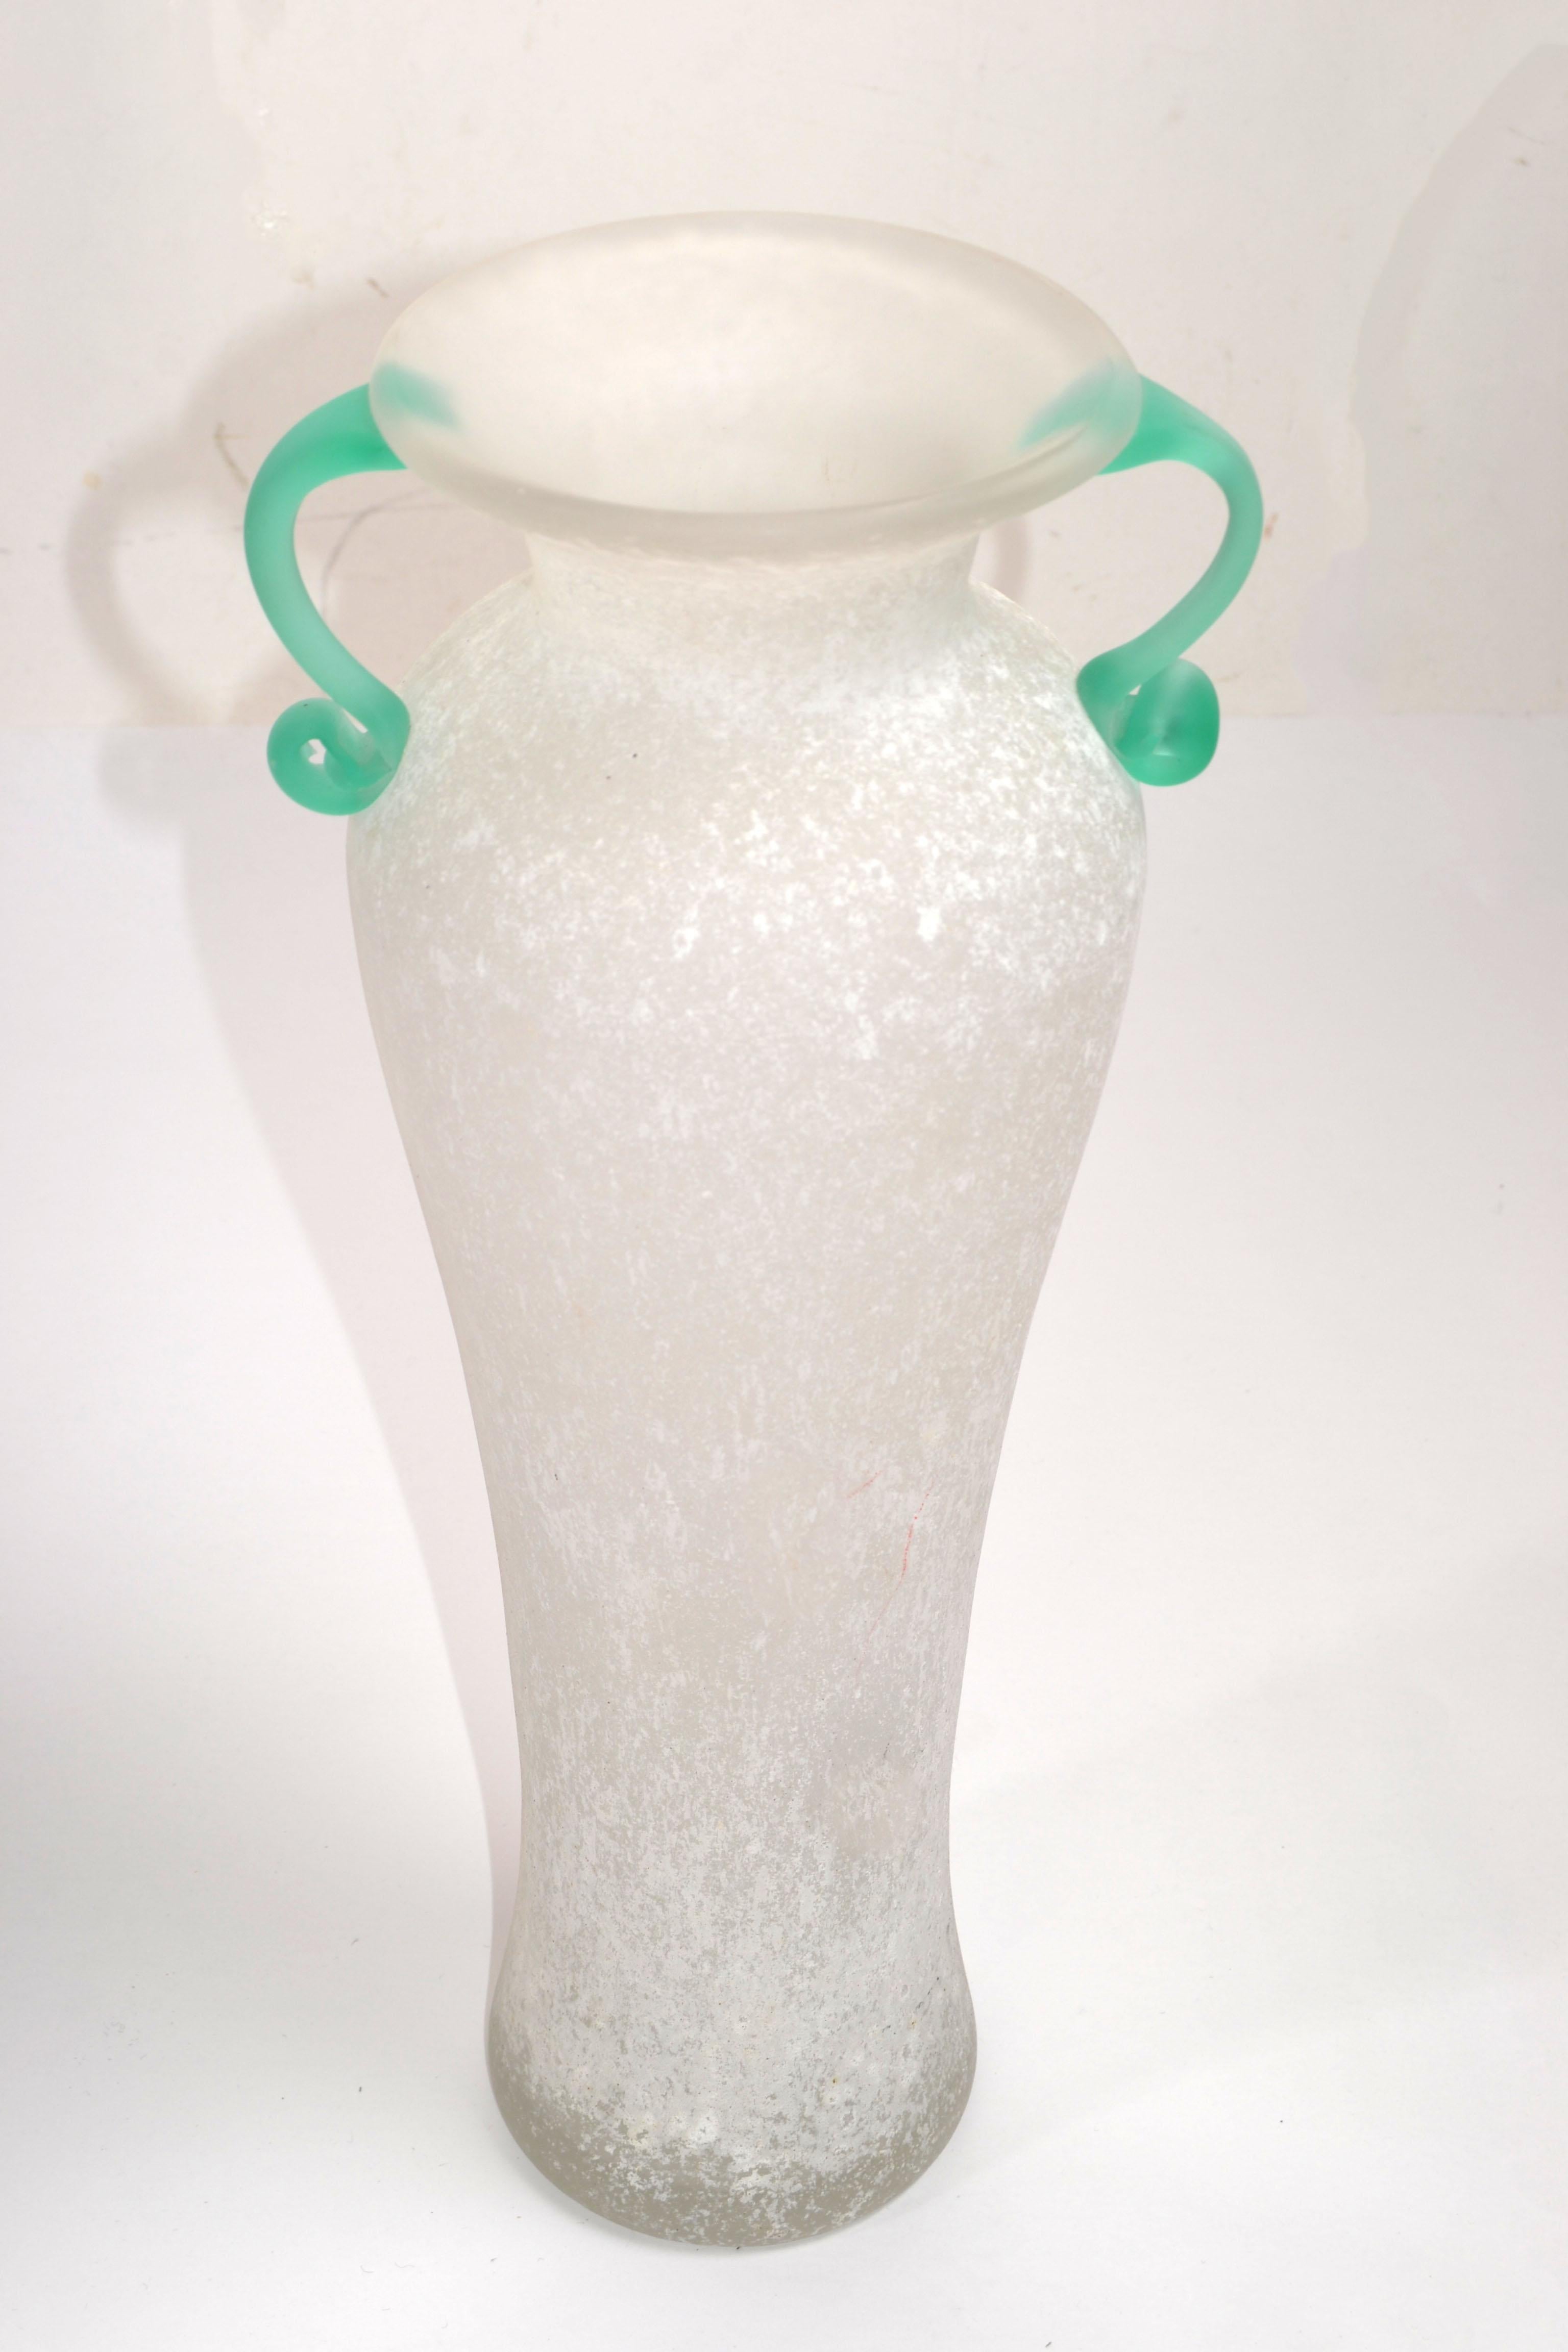 Tall Archimede Seguso Scavo Bianco Flower Vase Italy White & Mint Green Handles  For Sale 1